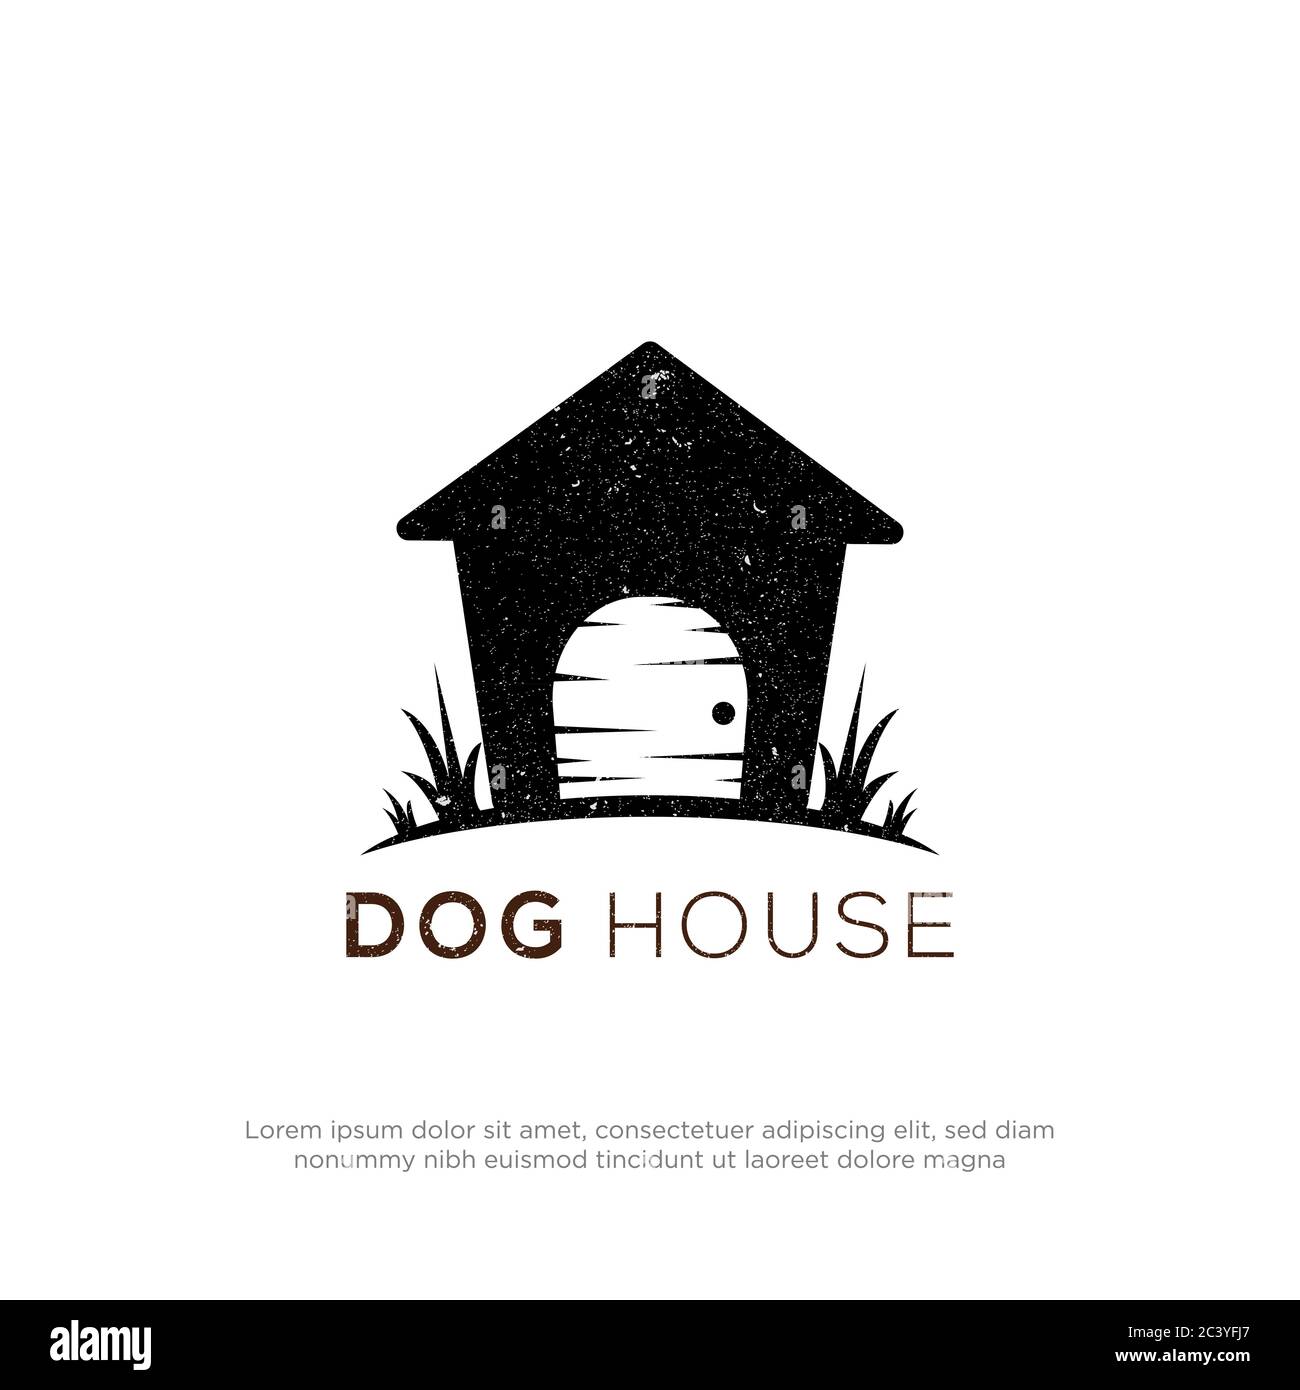 Rustic dog house logo inspiration, pet store logo design with vintage style Stock Vector